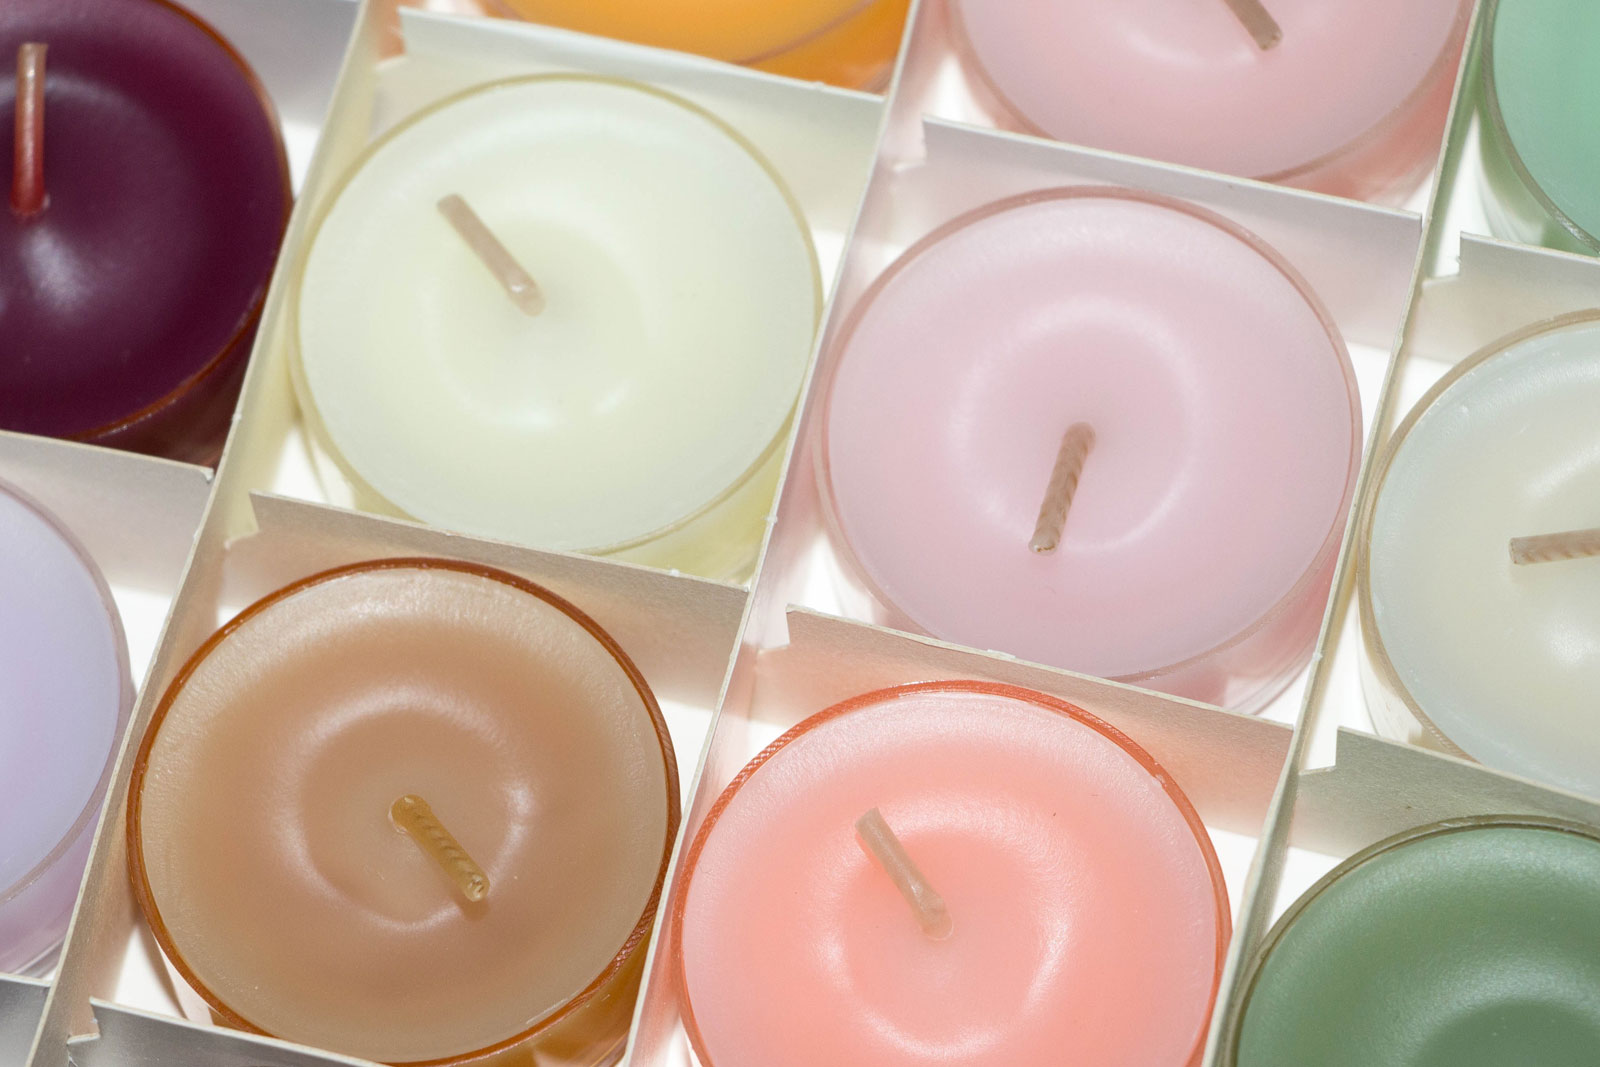 Are wax melts more eco-friendly than candles?